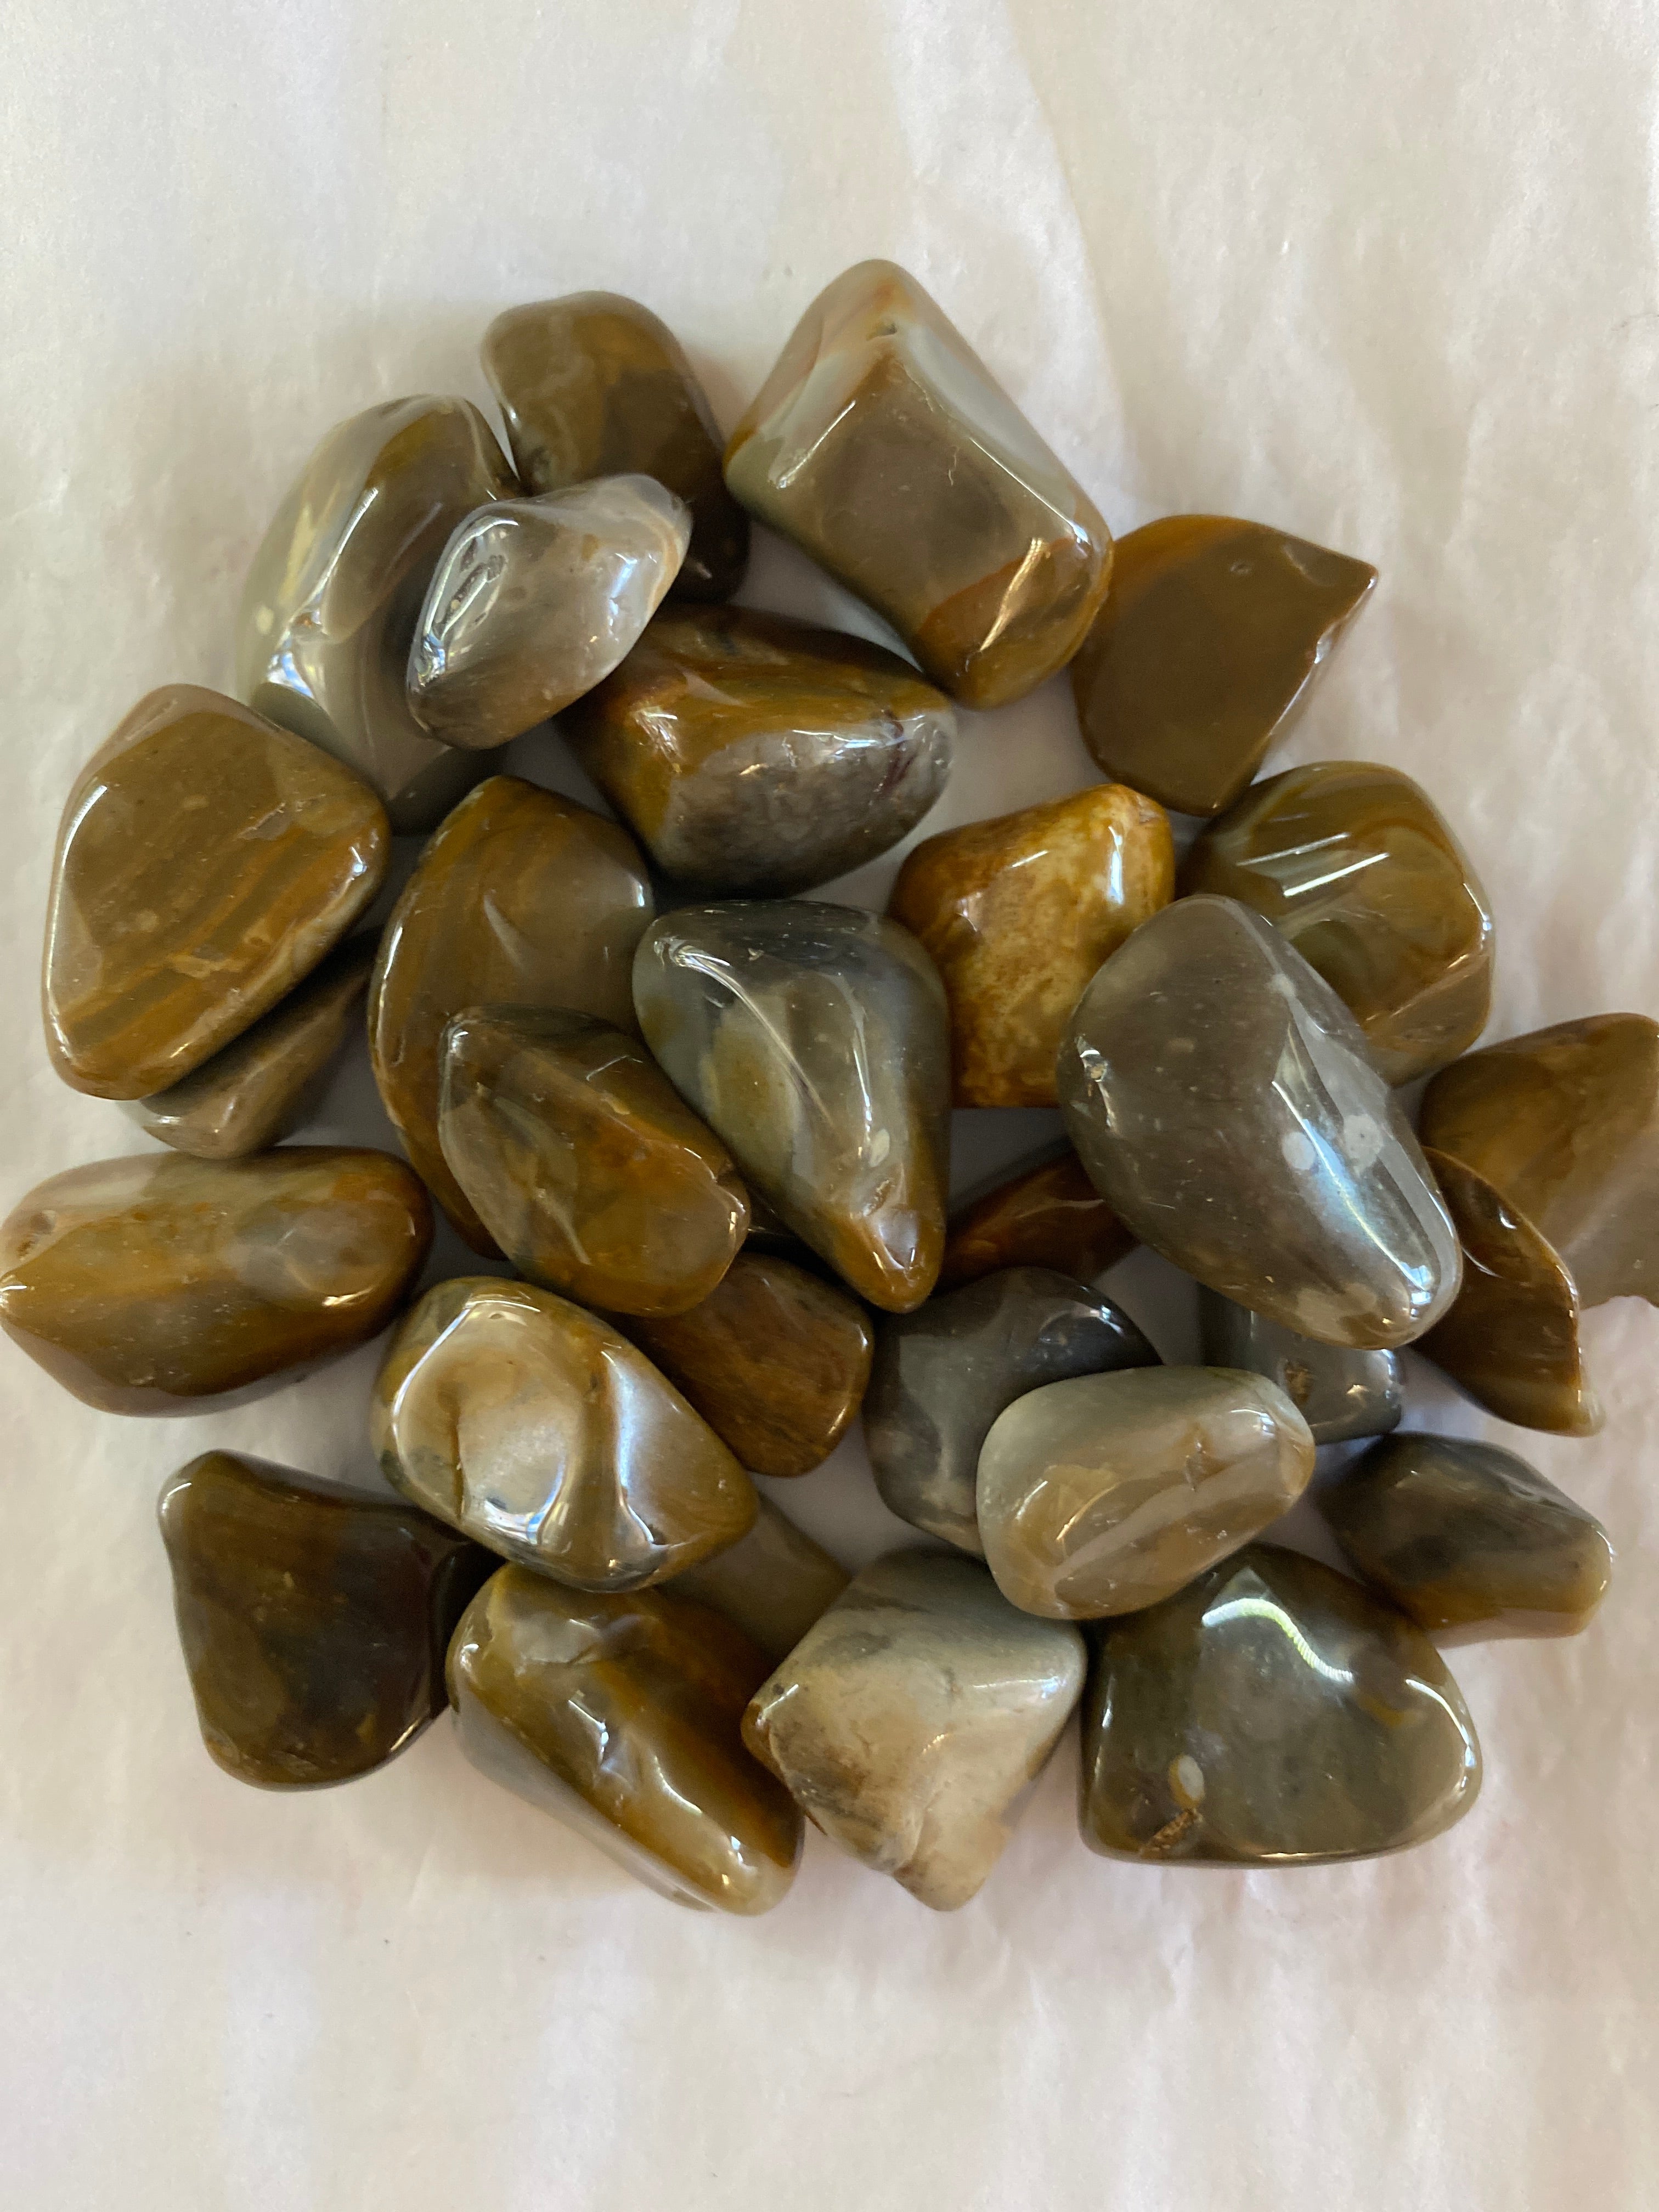 Several polished stone with a unique design, called a Crop Circle Stone, thought to encourage exploration, unconventional thinking, and connection to the cosmos.